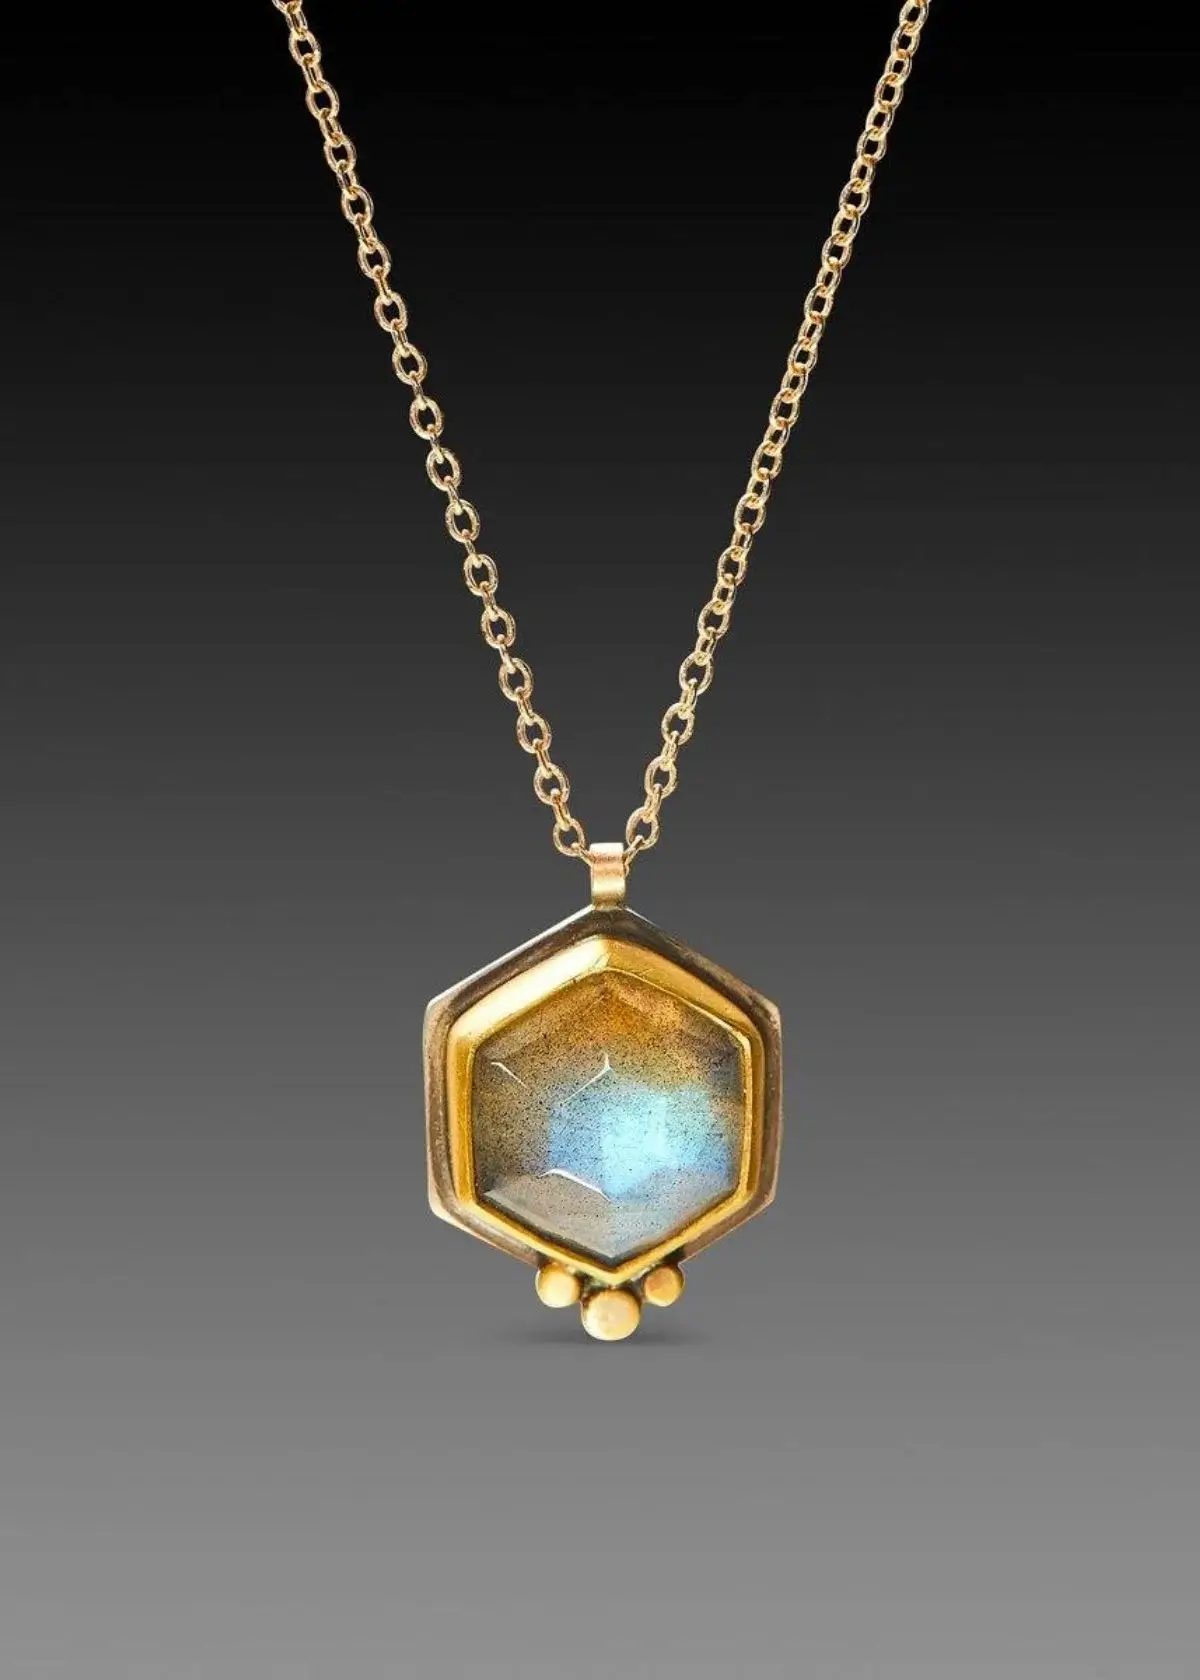 What is a Hexagon Necklace?